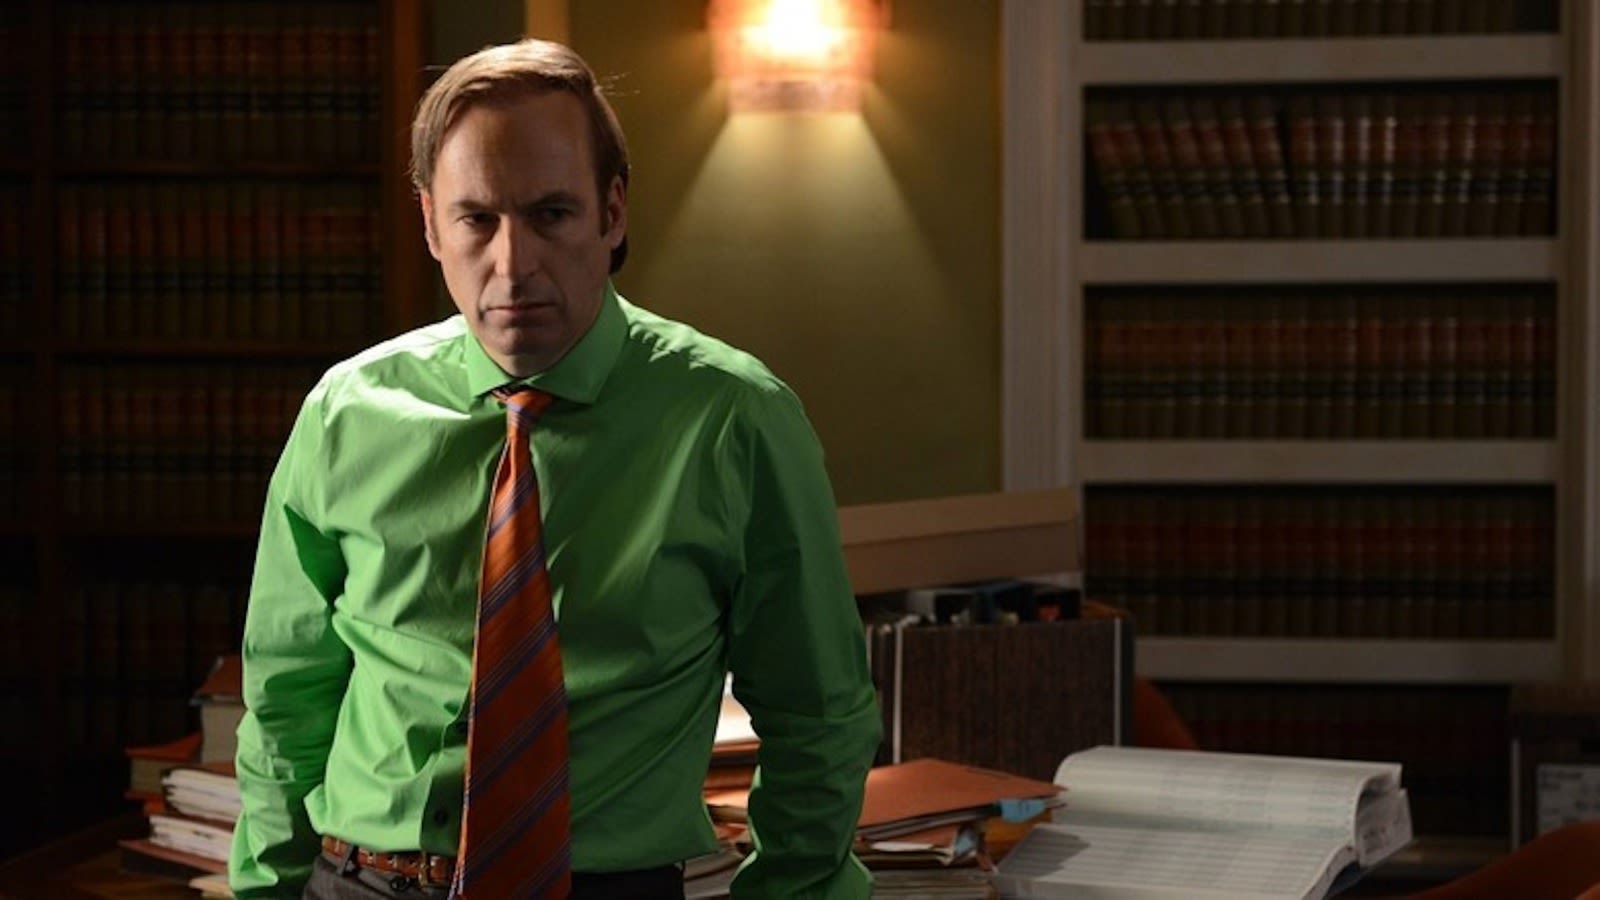 Bob Odenkirk Knows Why Steve Carrell Beat Him Out For The Lead On The Office - SlashFilm